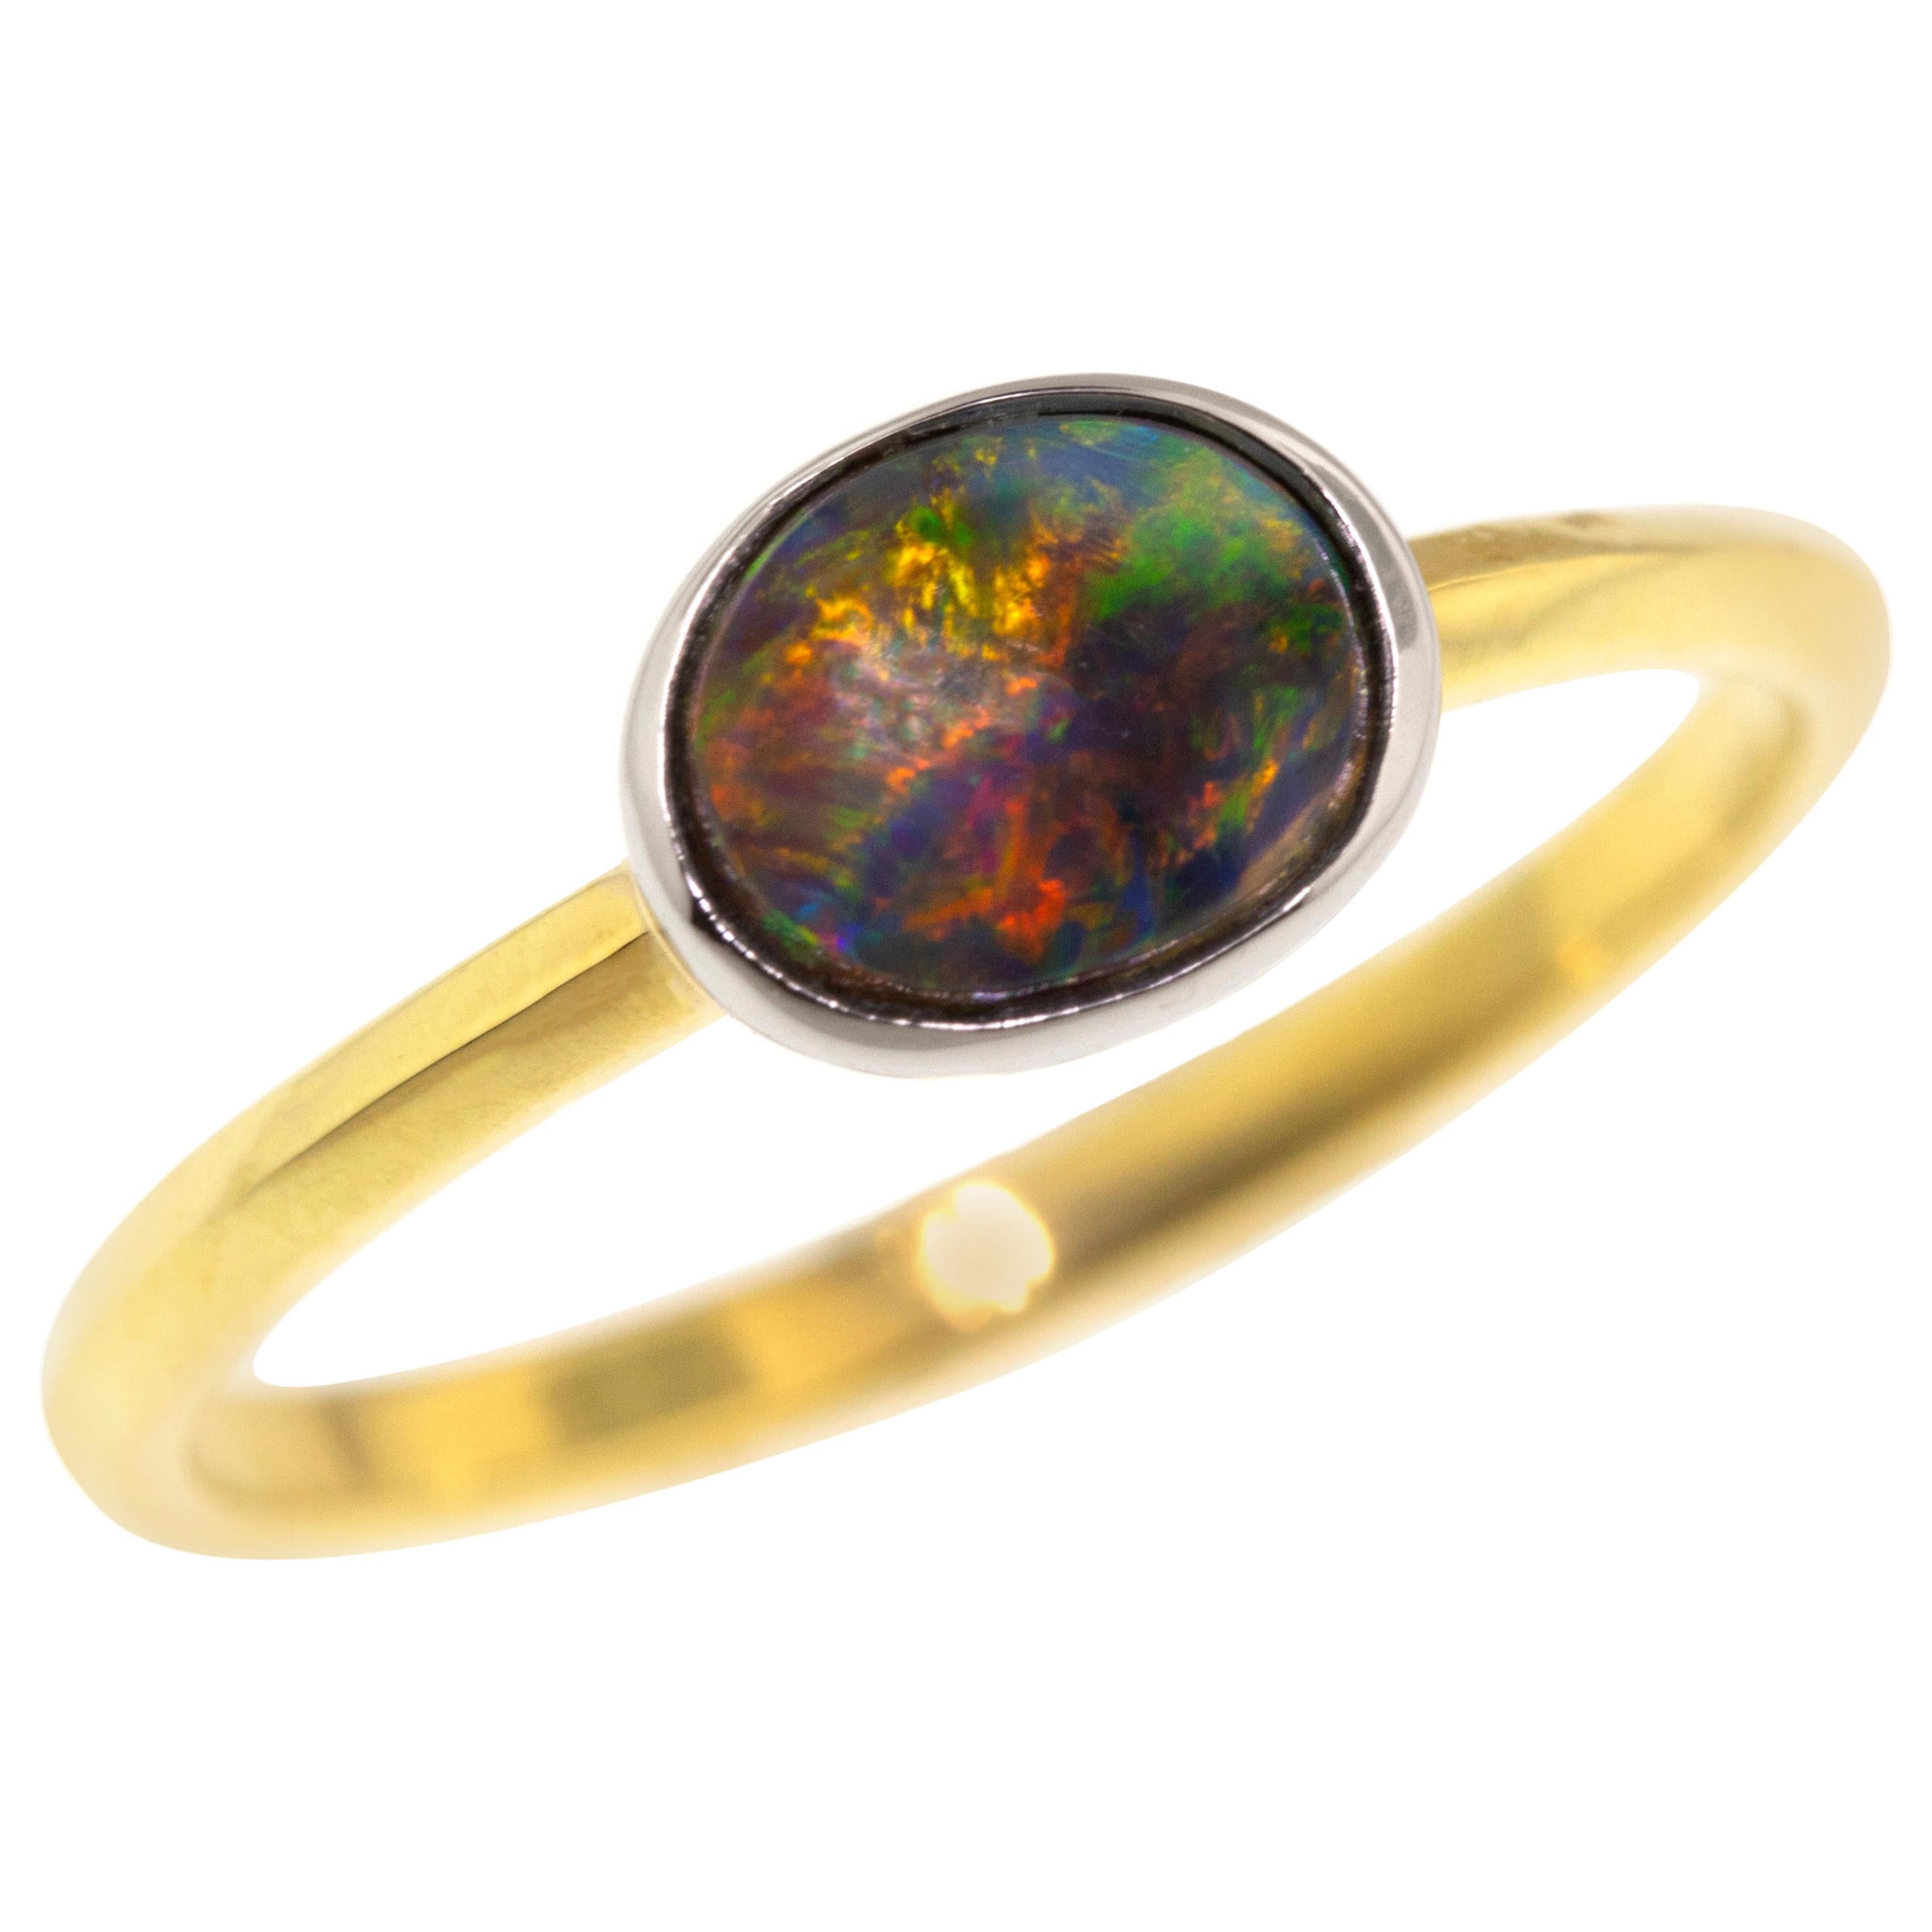 0.59ct Black Opal in 18kt and Platinum Paloma Ring by Cynthia Scott Jewelry For Sale